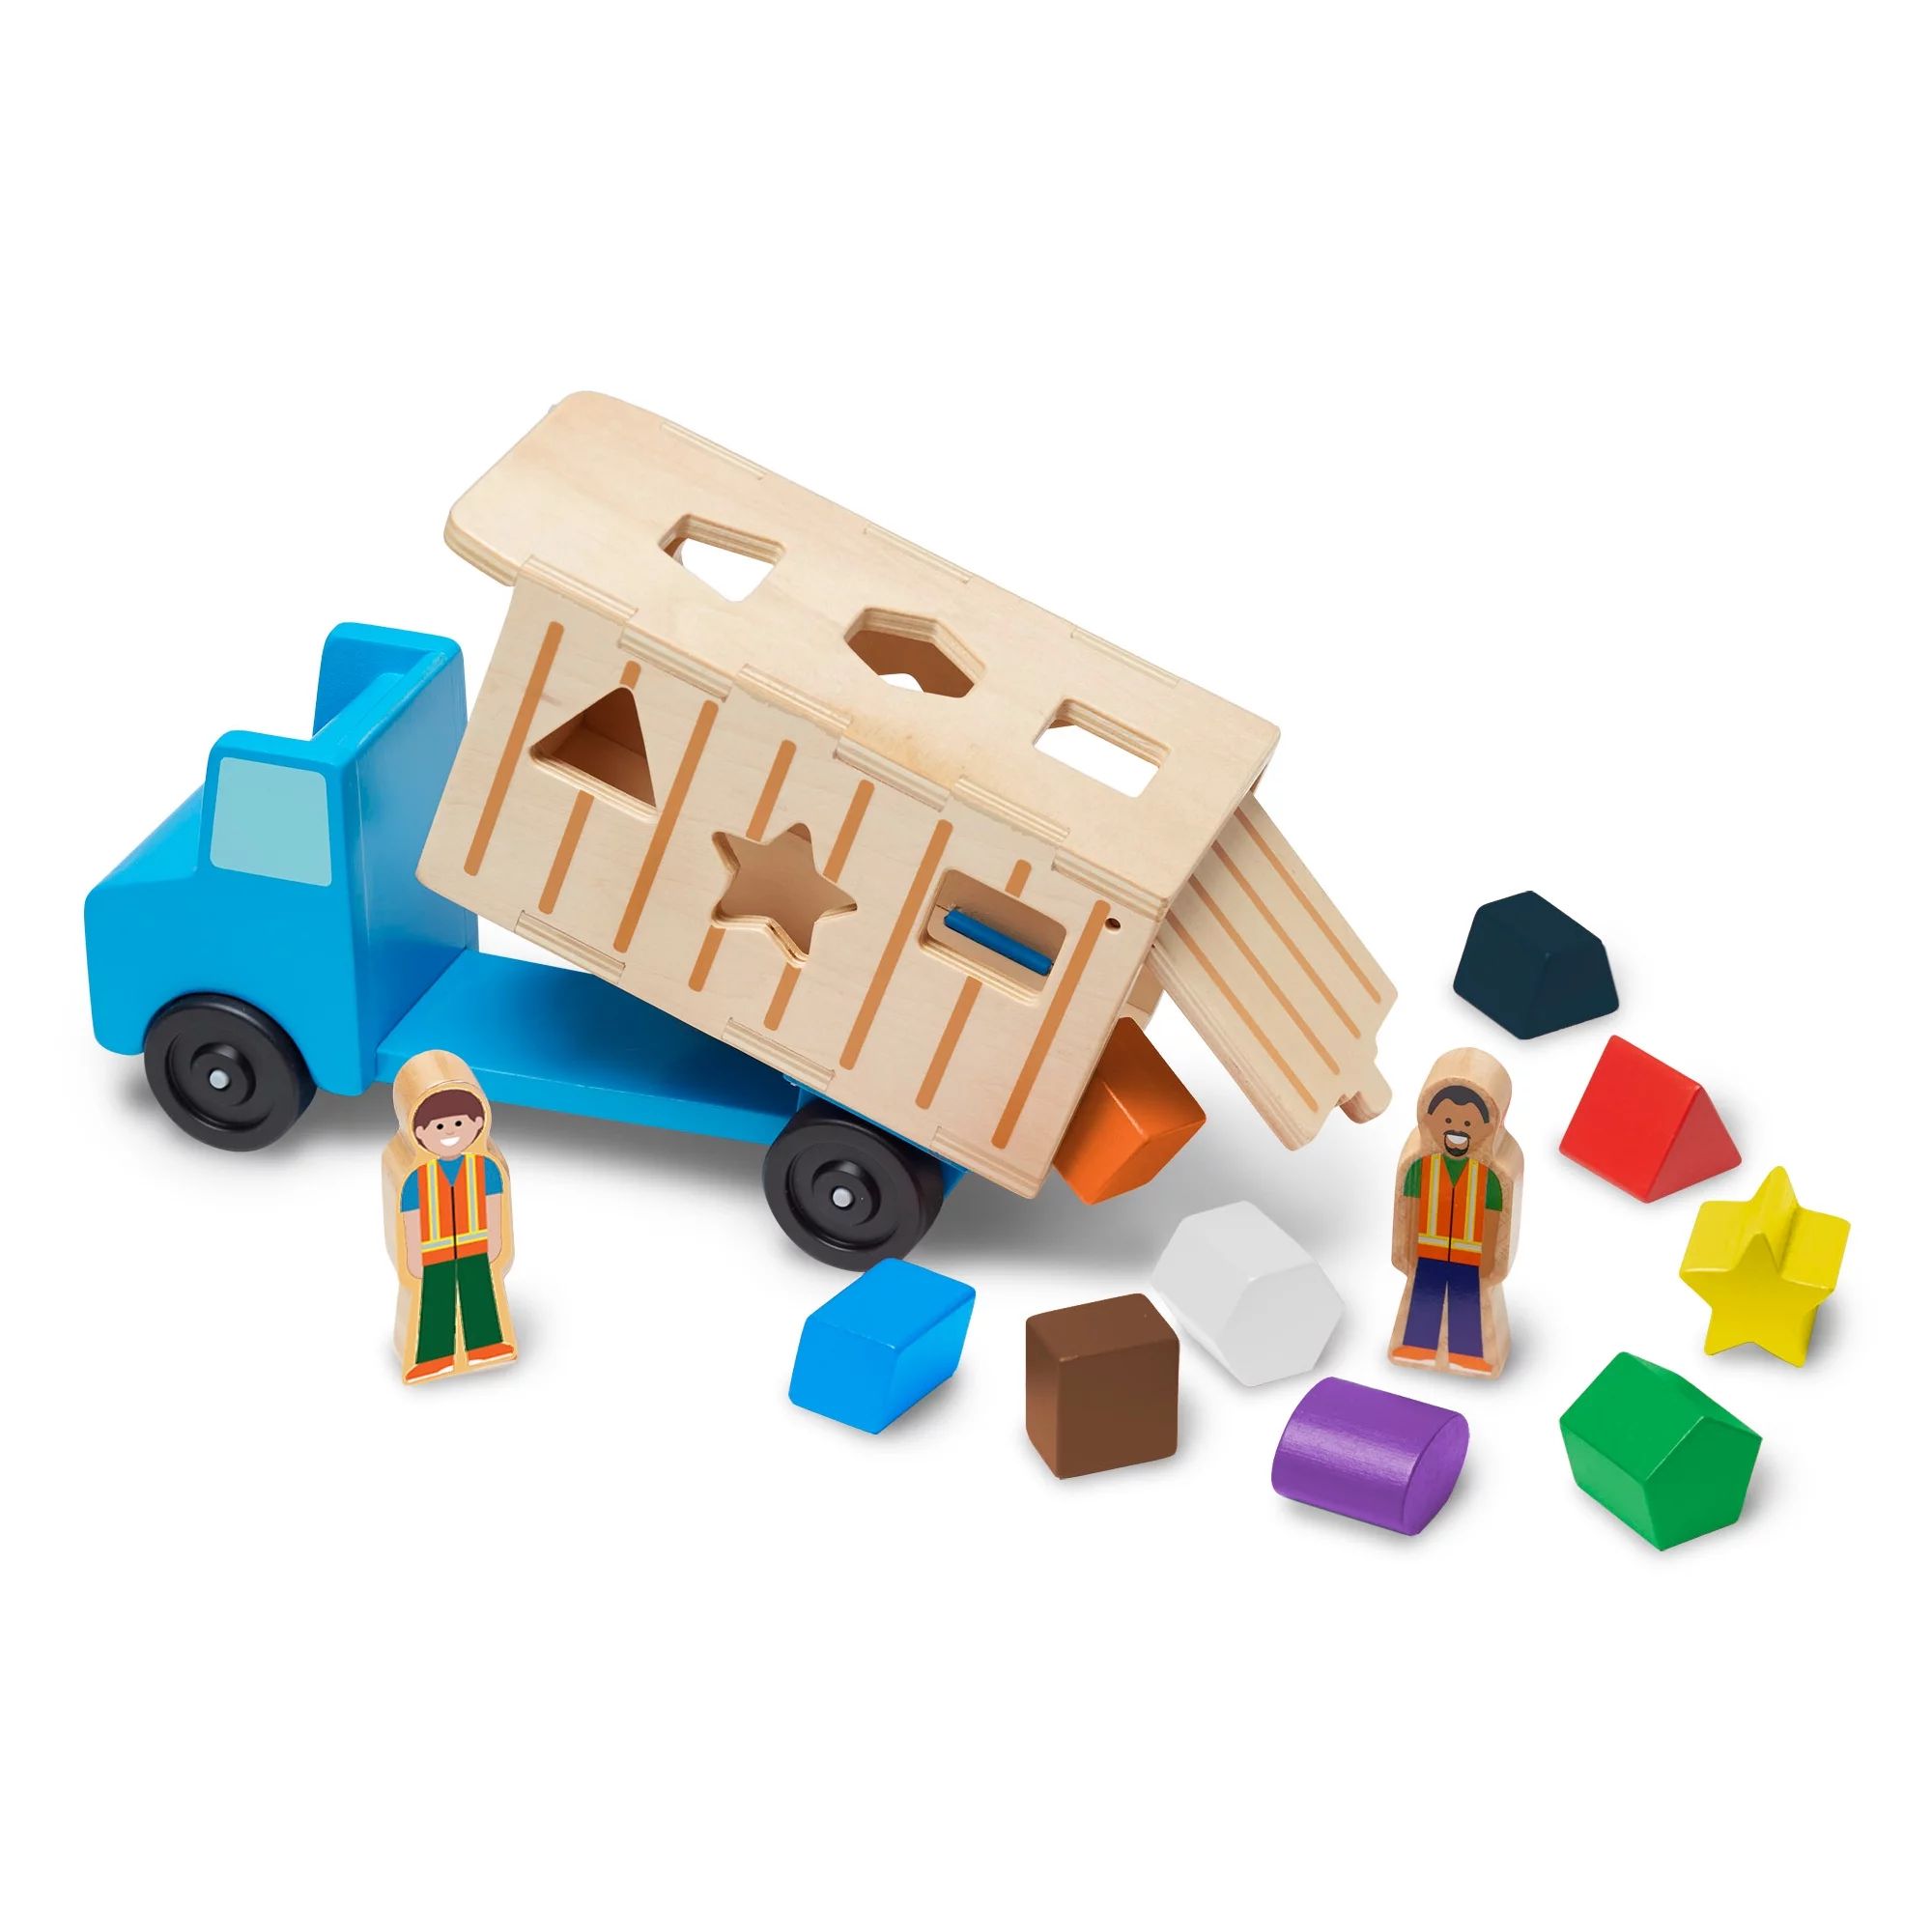 Melissa & Doug Shape-Sorting Wooden Dump Truck Toy With 9 Colorful Shapes and 2 Play Figures | Walmart (US)